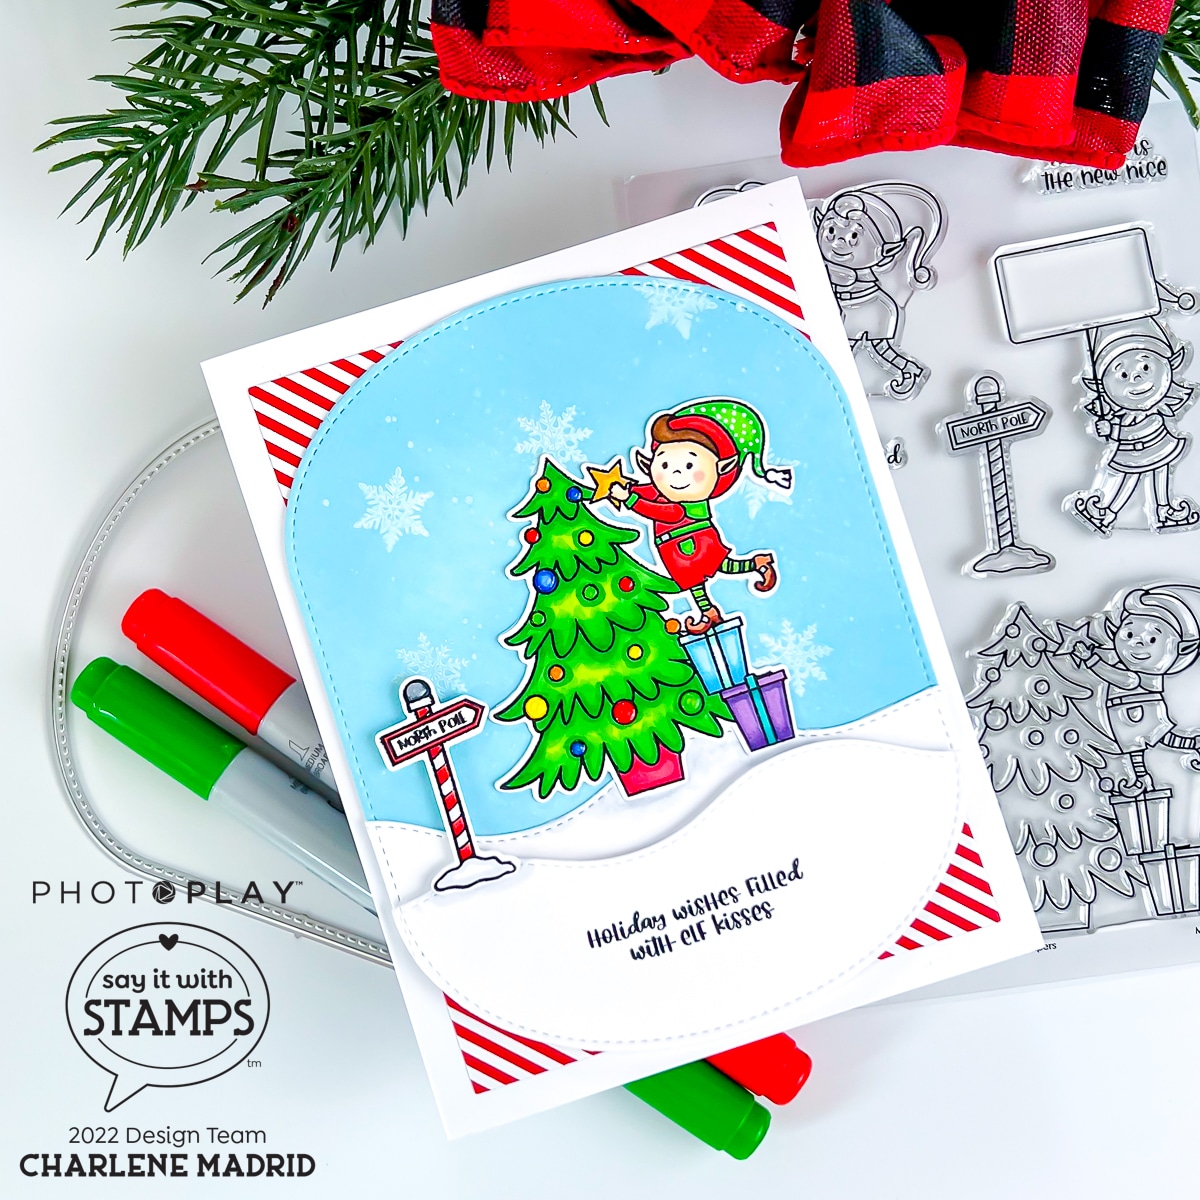 PhotoPlay Say It With Stamps Santa's Helpers